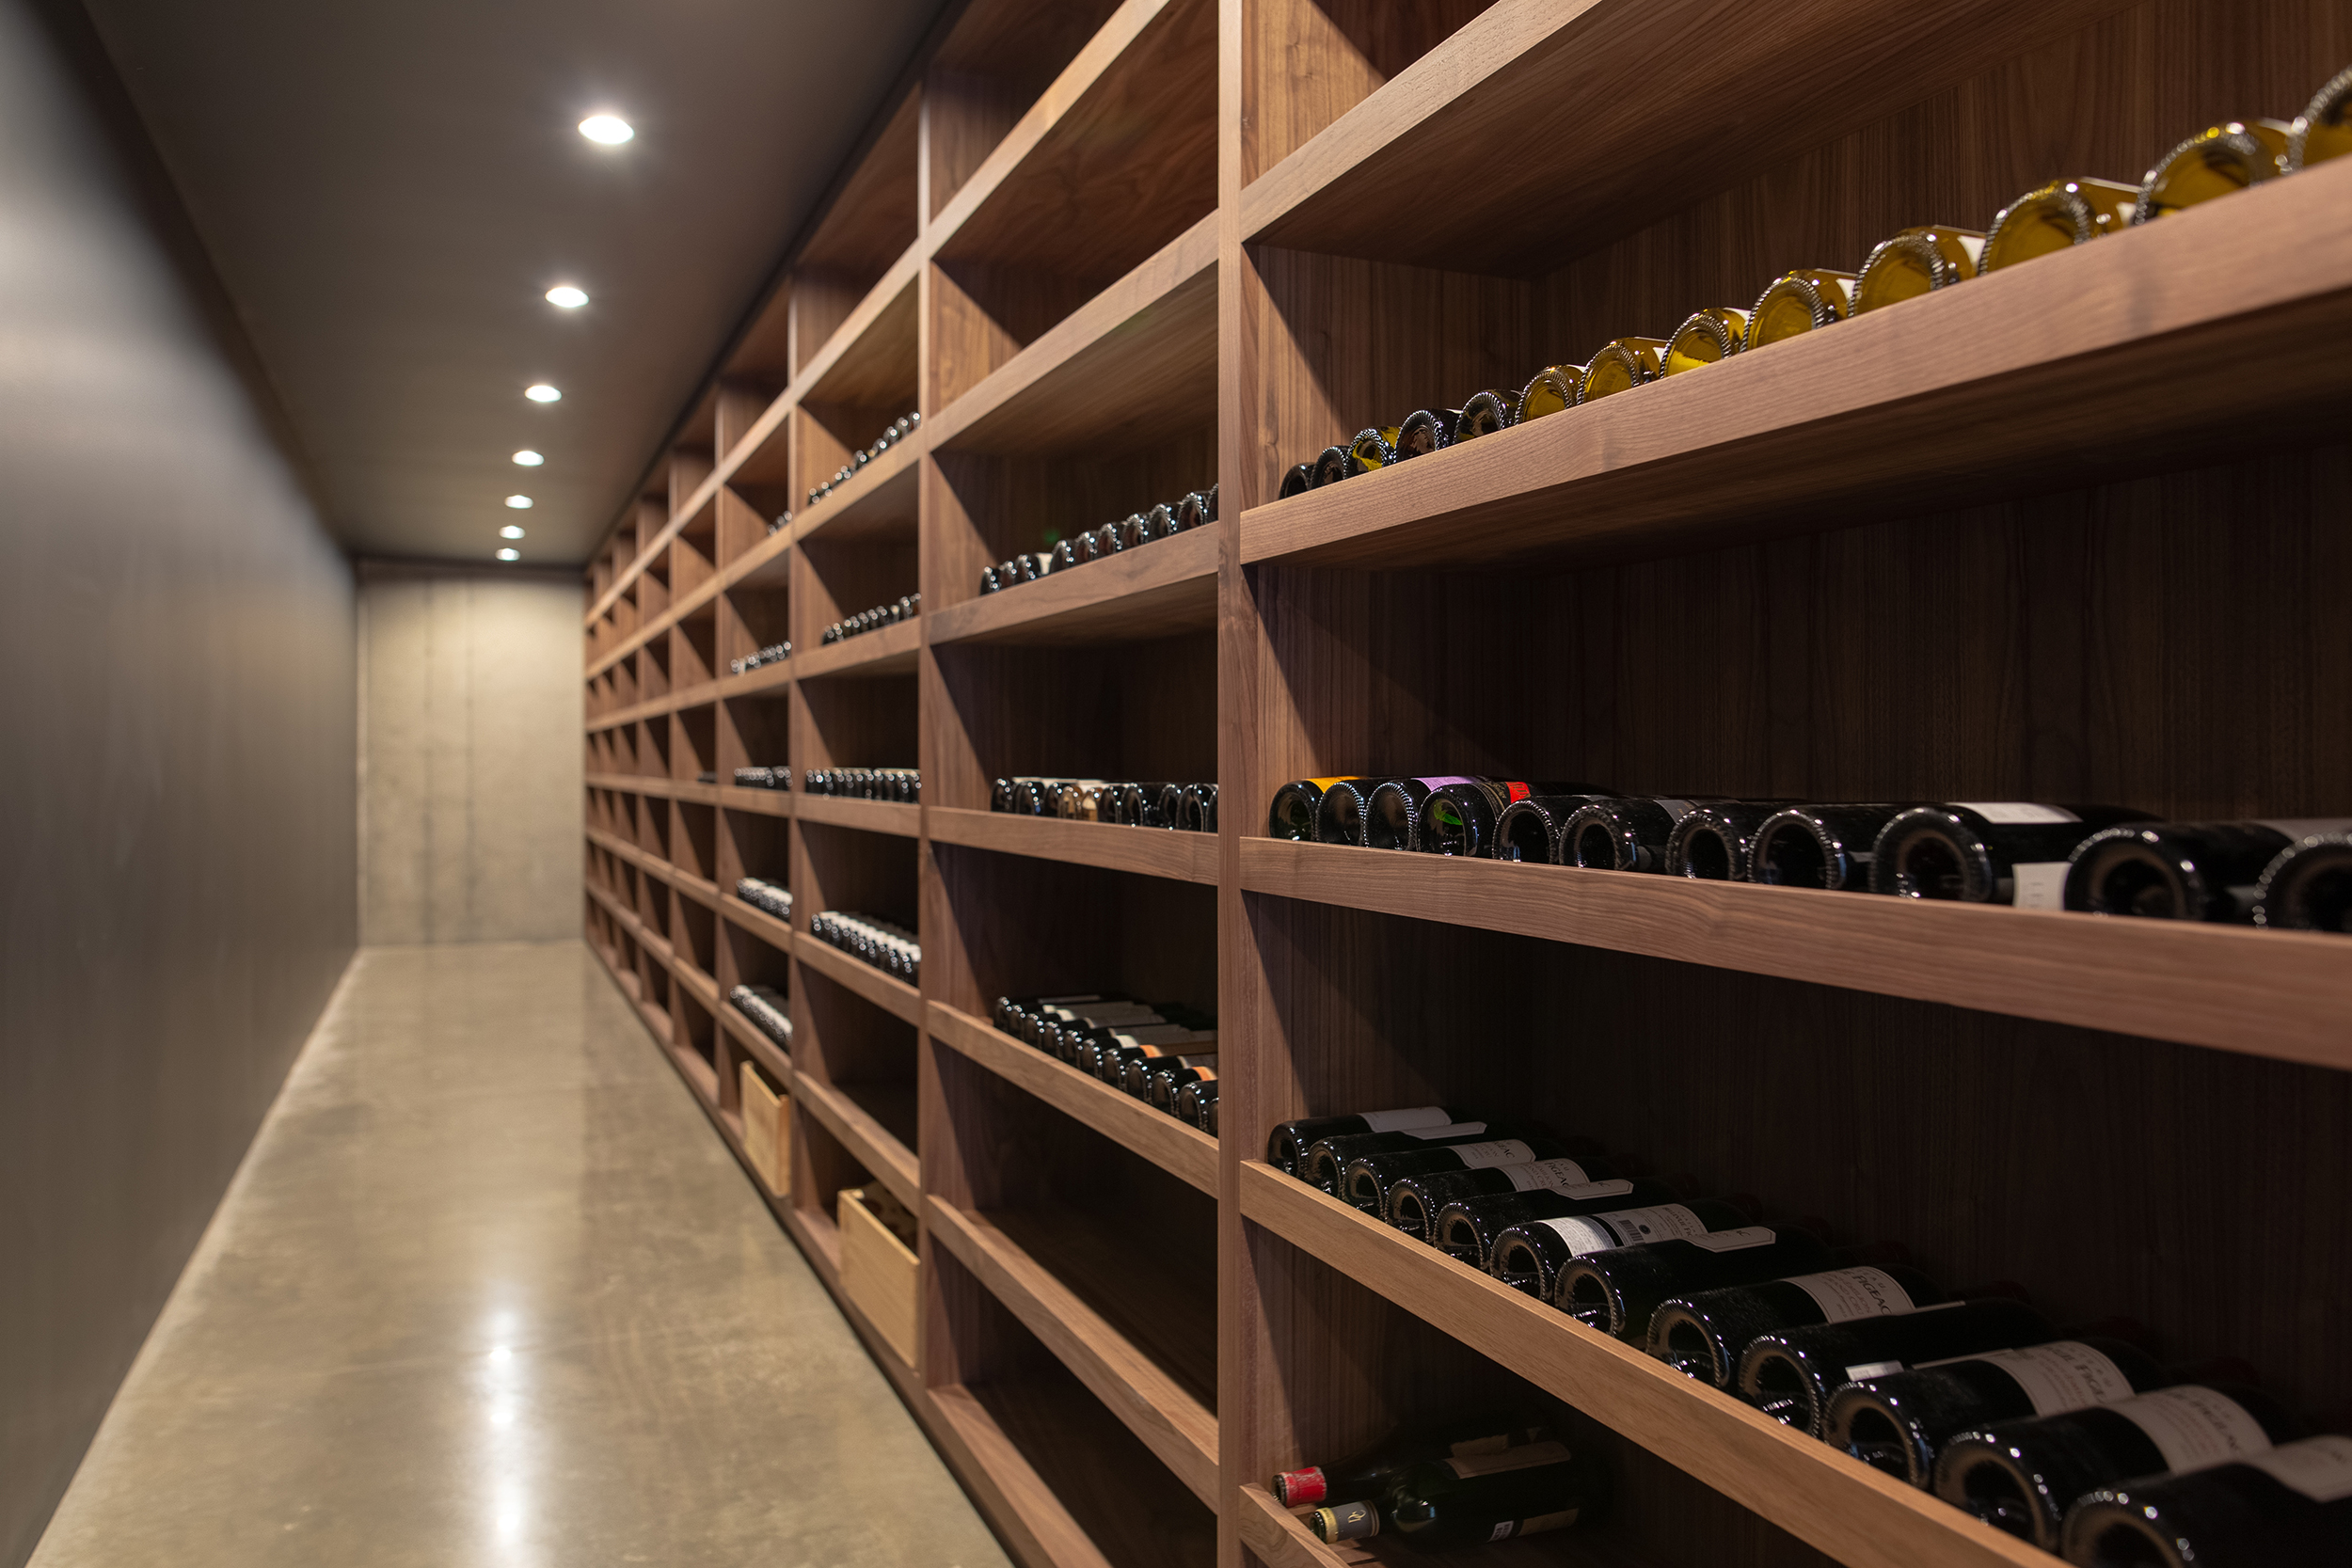 The basement wine cellar was designed to be passively cooled year-round. Custom walnut shelving warmed the minimal palette of polished concrete and soot black